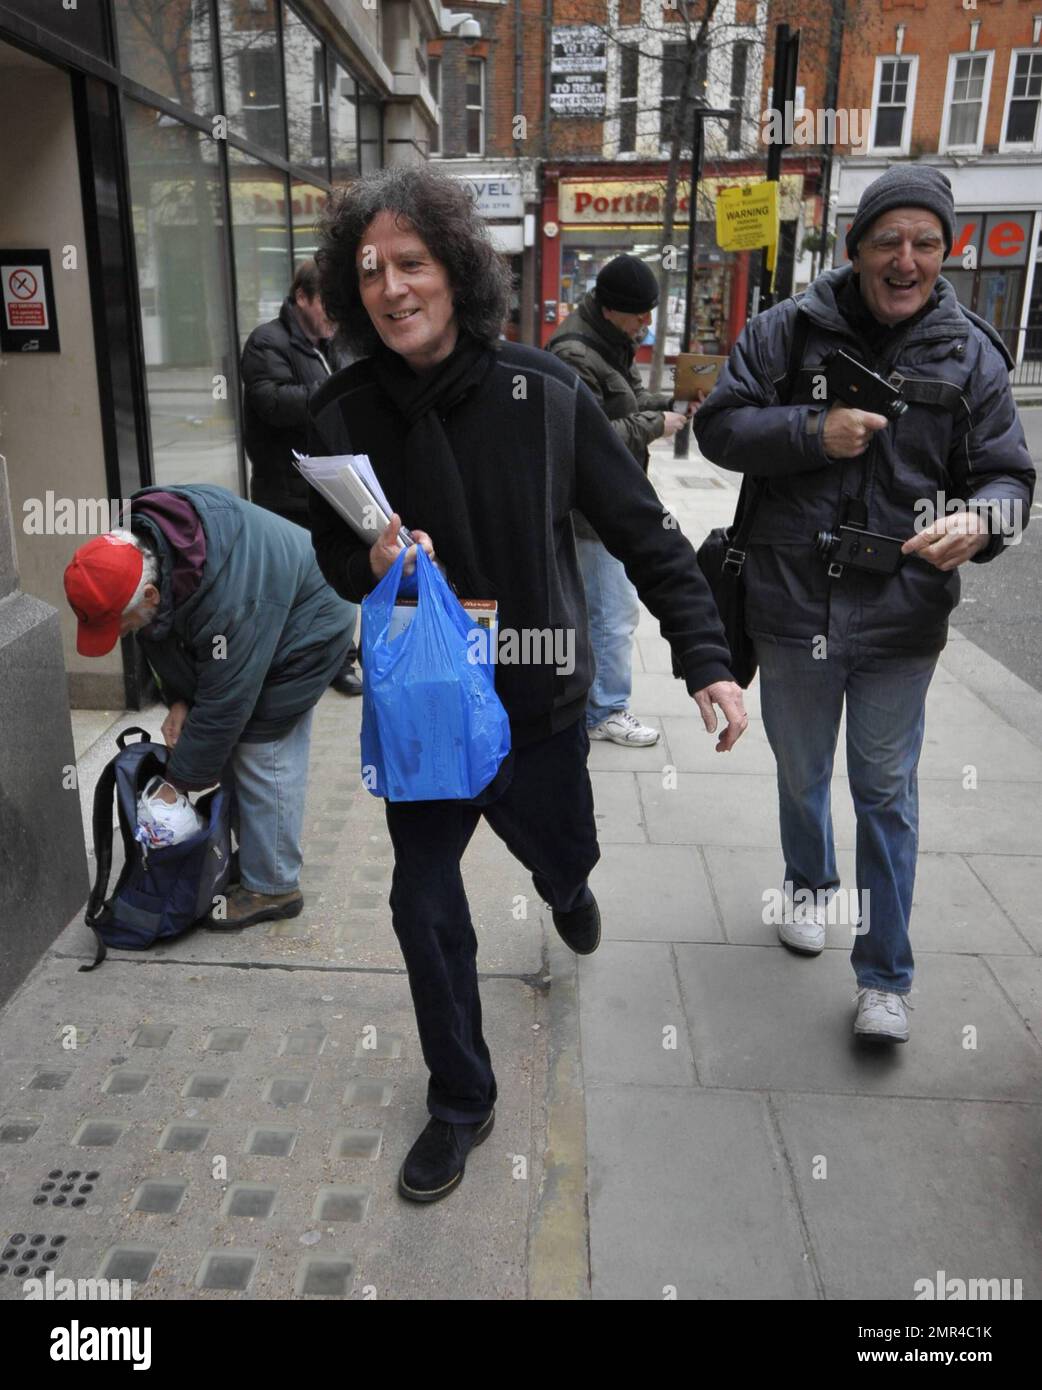 EXCLUSIVE!! 1970's pop icon and Irish singer songwriter Gilbert O'Sullivan  smiles and carries a bag of Jersey Cream Toffee candies, a gift for BBC  radio host Steve Wright, as he arrives at